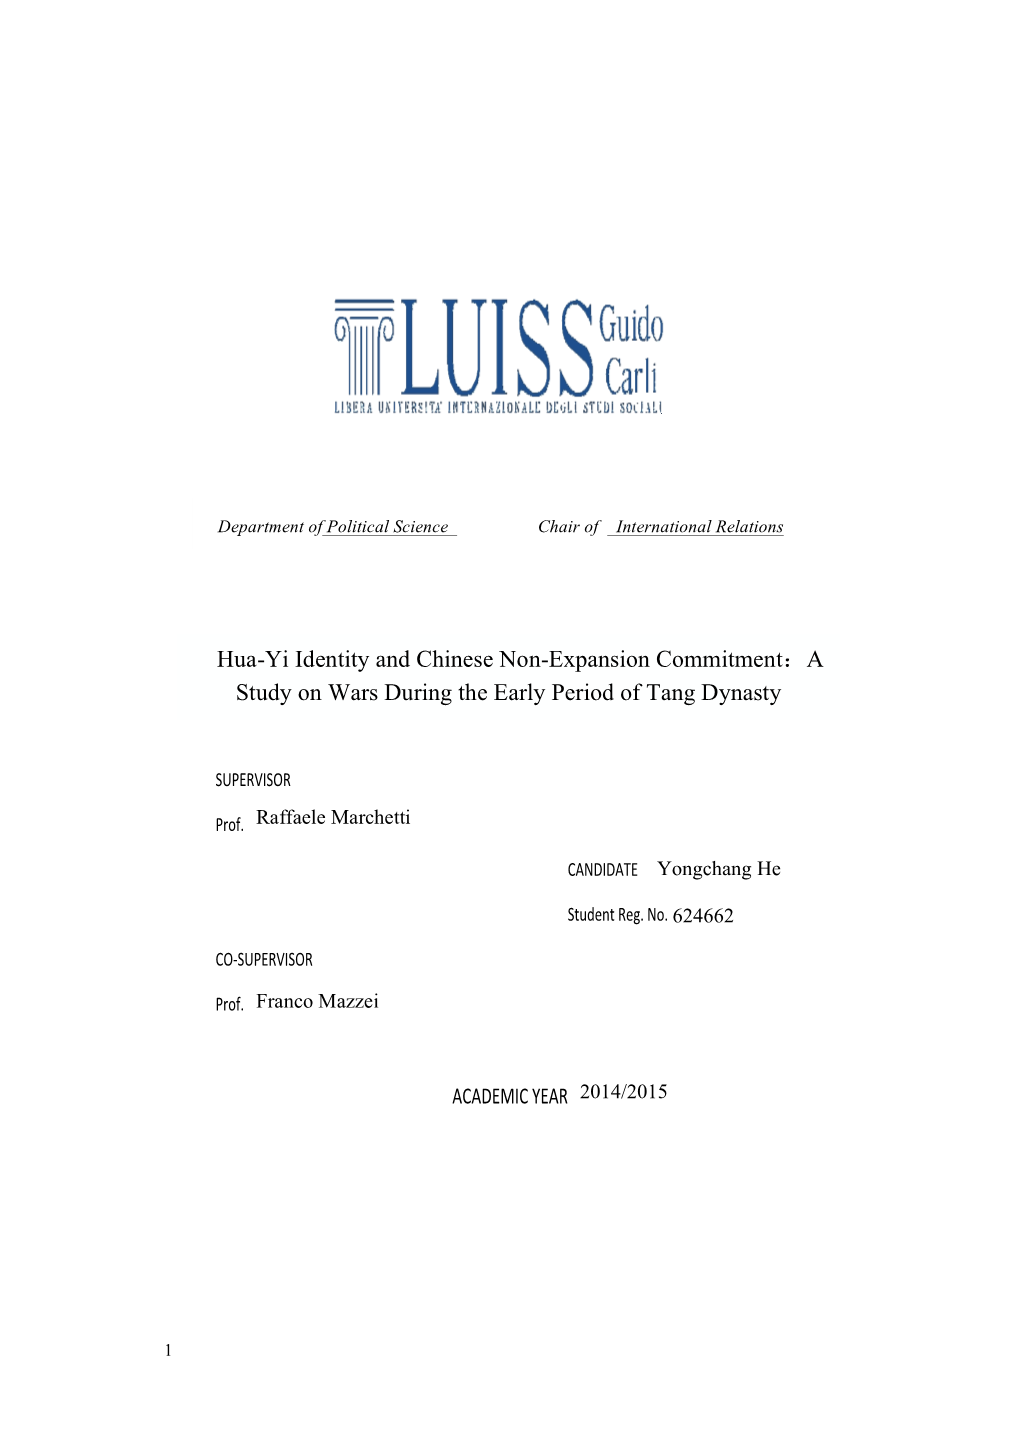 Hua-Yi Identity and Chinese Non-Expansion Commitment：A Study on Wars During Thetitle Early� Period of Tang Dynasty